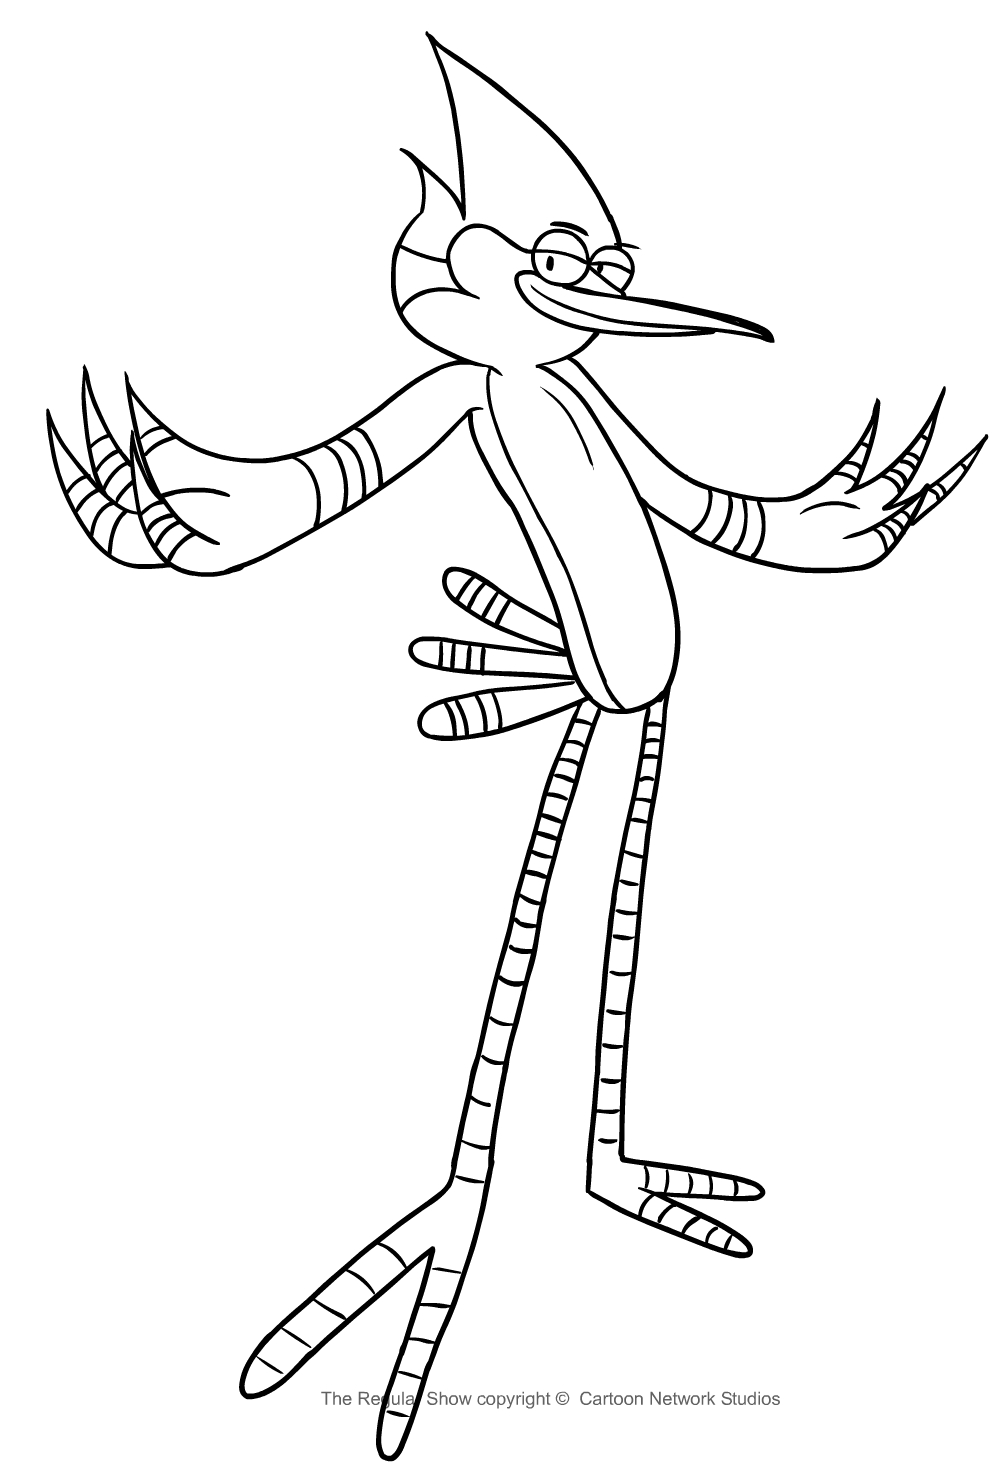 Mordecai from Regular Show coloring page to print and coloring